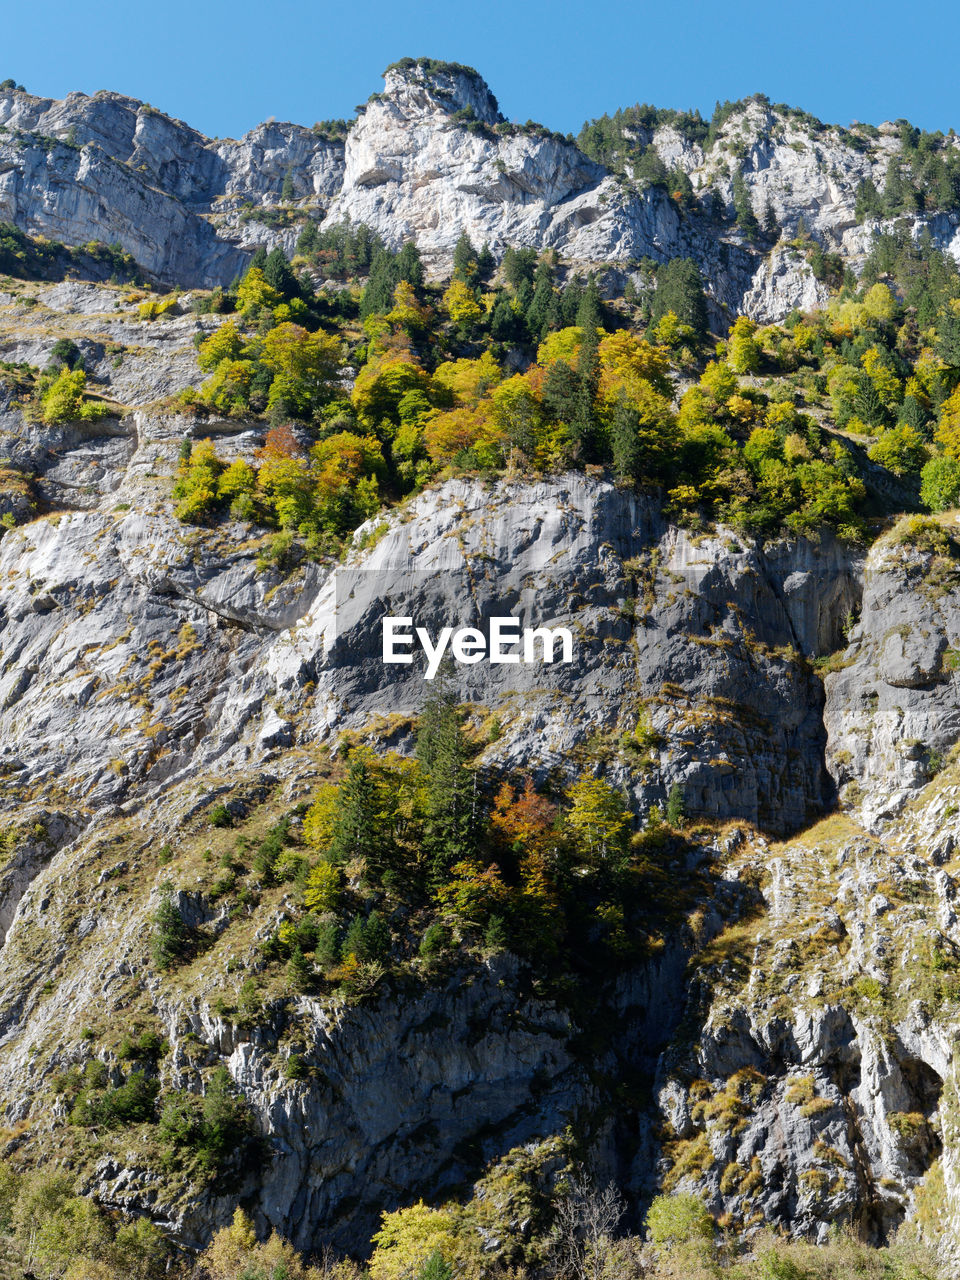 mountain, rock, nature, beauty in nature, scenics - nature, plant, environment, landscape, sky, wilderness, ridge, adventure, land, tree, mountain range, no people, clear sky, walking, travel destinations, travel, outdoors, day, autumn, coniferous tree, non-urban scene, pine tree, activity, pinaceae, flower, geology, tranquility, sunny, mountain peak, tranquil scene, leisure activity, sunlight, pine woodland, rock formation, trail, tourism, cliff, forest, terrain, blue